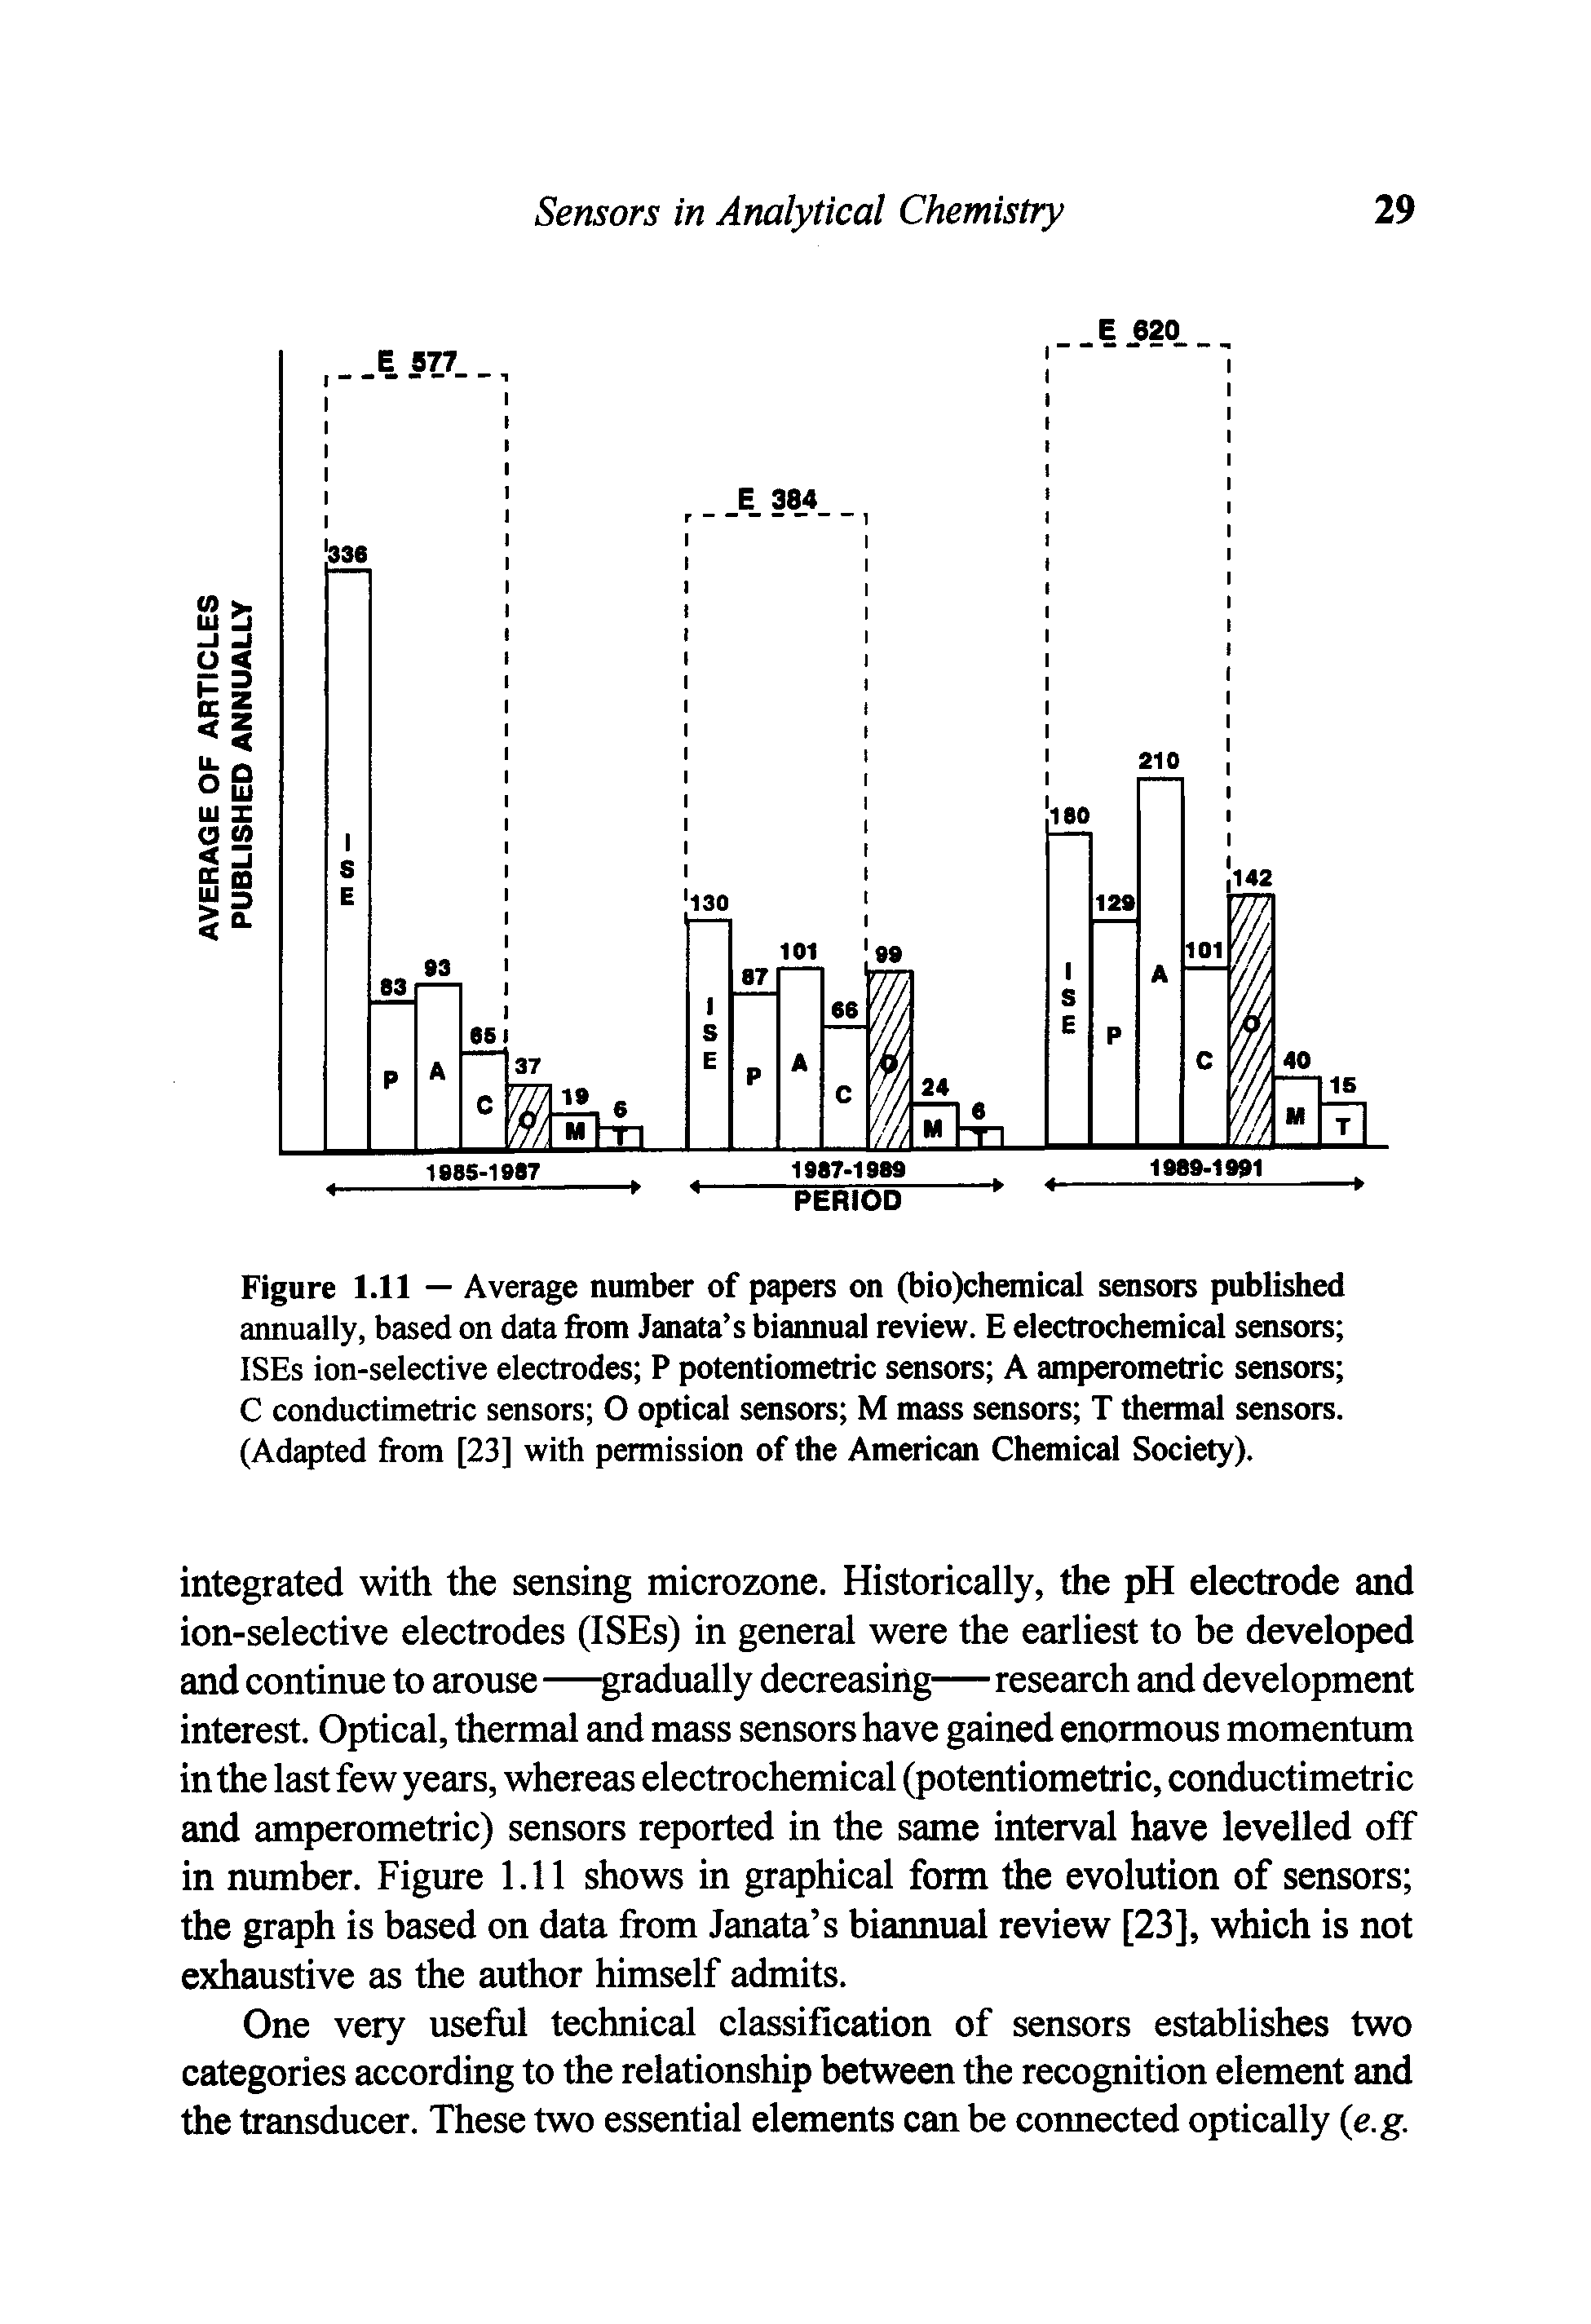 Figure 1.11 — Average number of papers on (bio)chemical sensors published annually, based on data from Janata s biannual review. E electrochemical sensors ISEs ion-selective electrodes P potentiometric sensors A amperometric sensors C conductimetric sensors O optical sensors M mass sensors T thermal sensors. (Adapted from [23] with permission of the American Chemical Society).